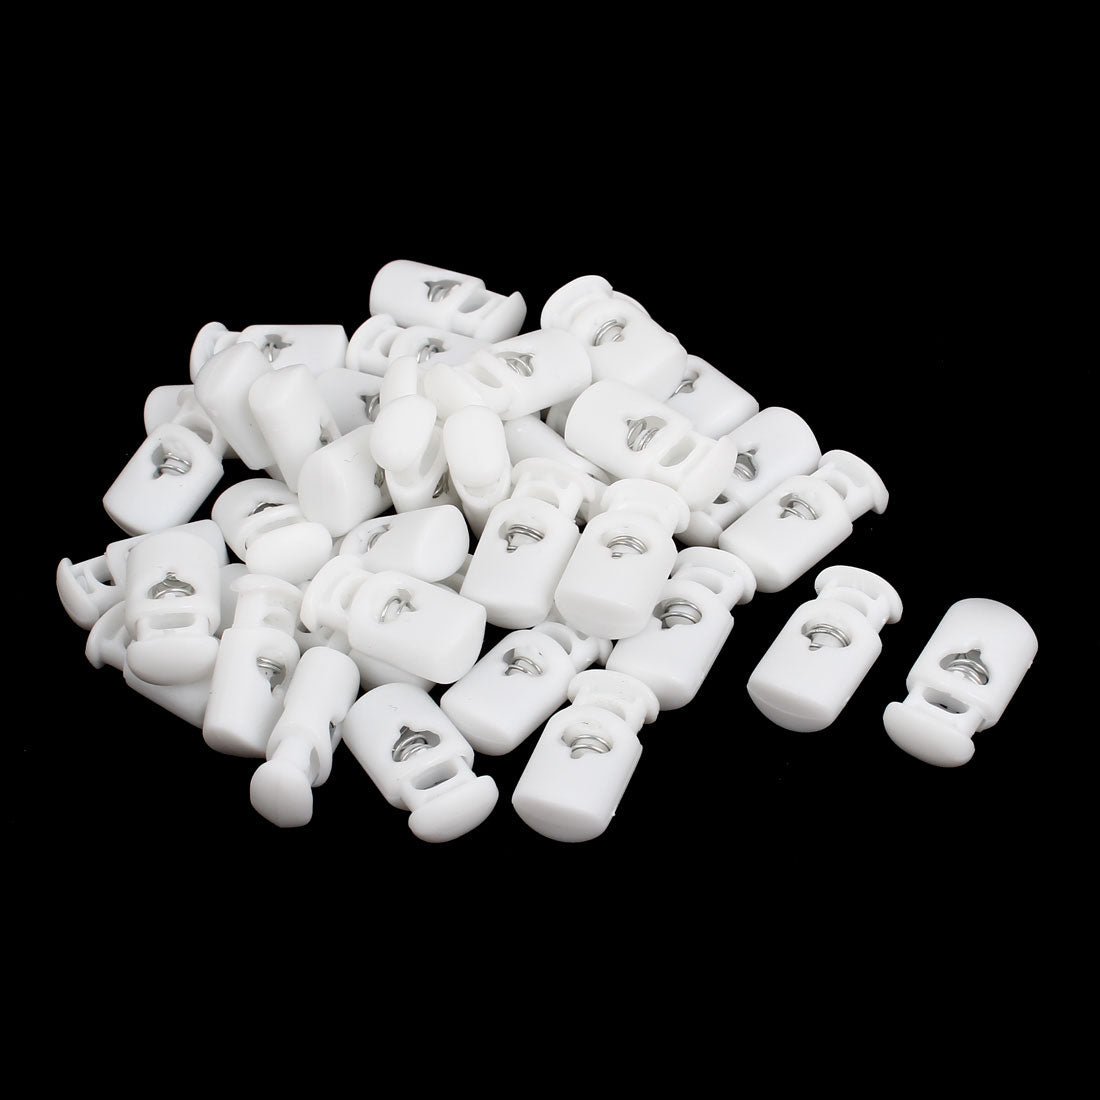 uxcell Uxcell 40 Pcs White Plastic Toggle Spring Clasp Stop Single Hole String Cord Locks